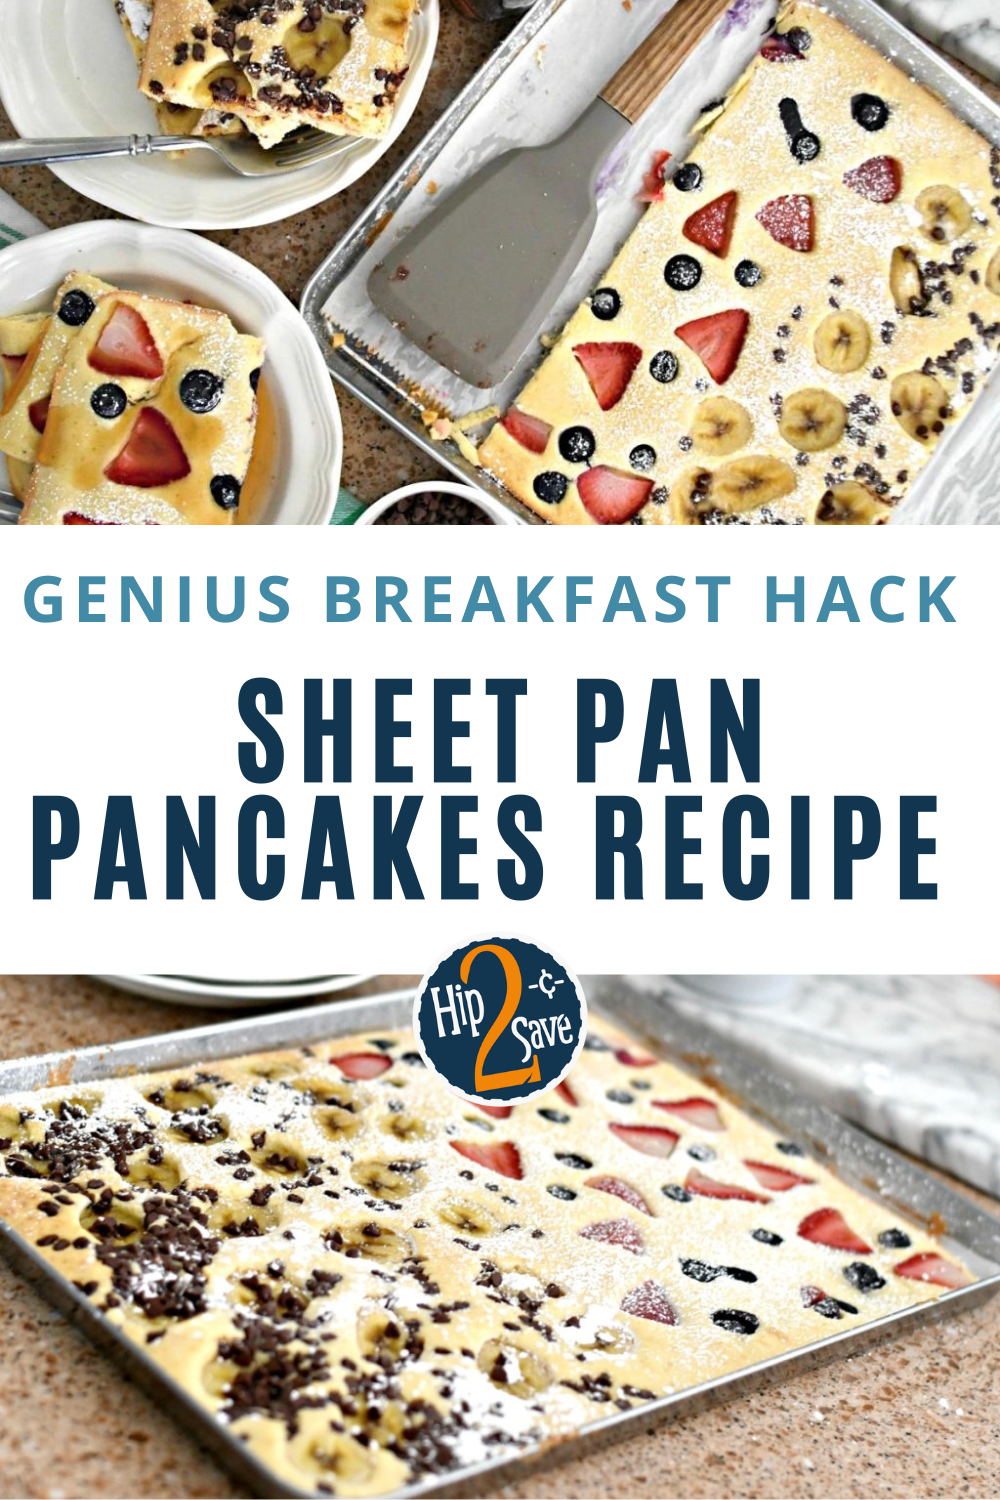 I Tried Sheet Pan Pancakes: How'd They Stack Up? - Cook with Kerry